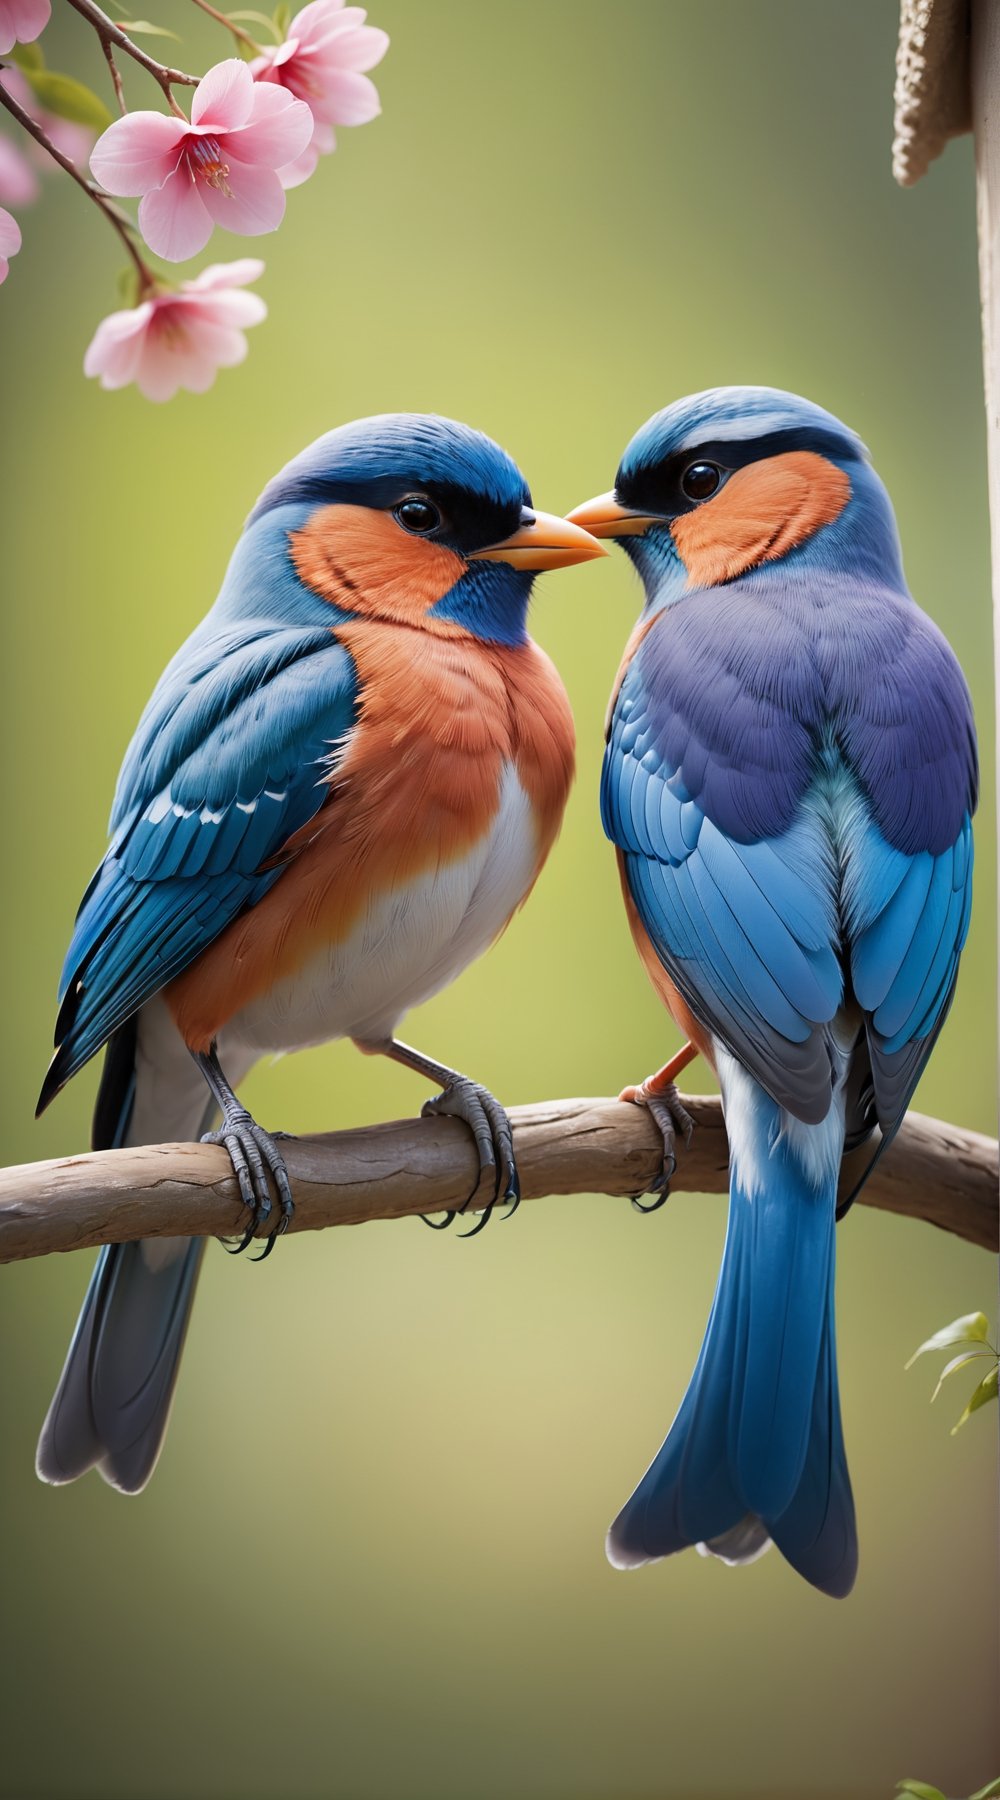 Capture the essence of love in the avian world with two beautiful and cute bird couples, their feathers intertwined as they perch together. This heartwarming scene invites artists to depict the tender connection and vibrant beauty of these feathered pairs in a delightful masterpiece.